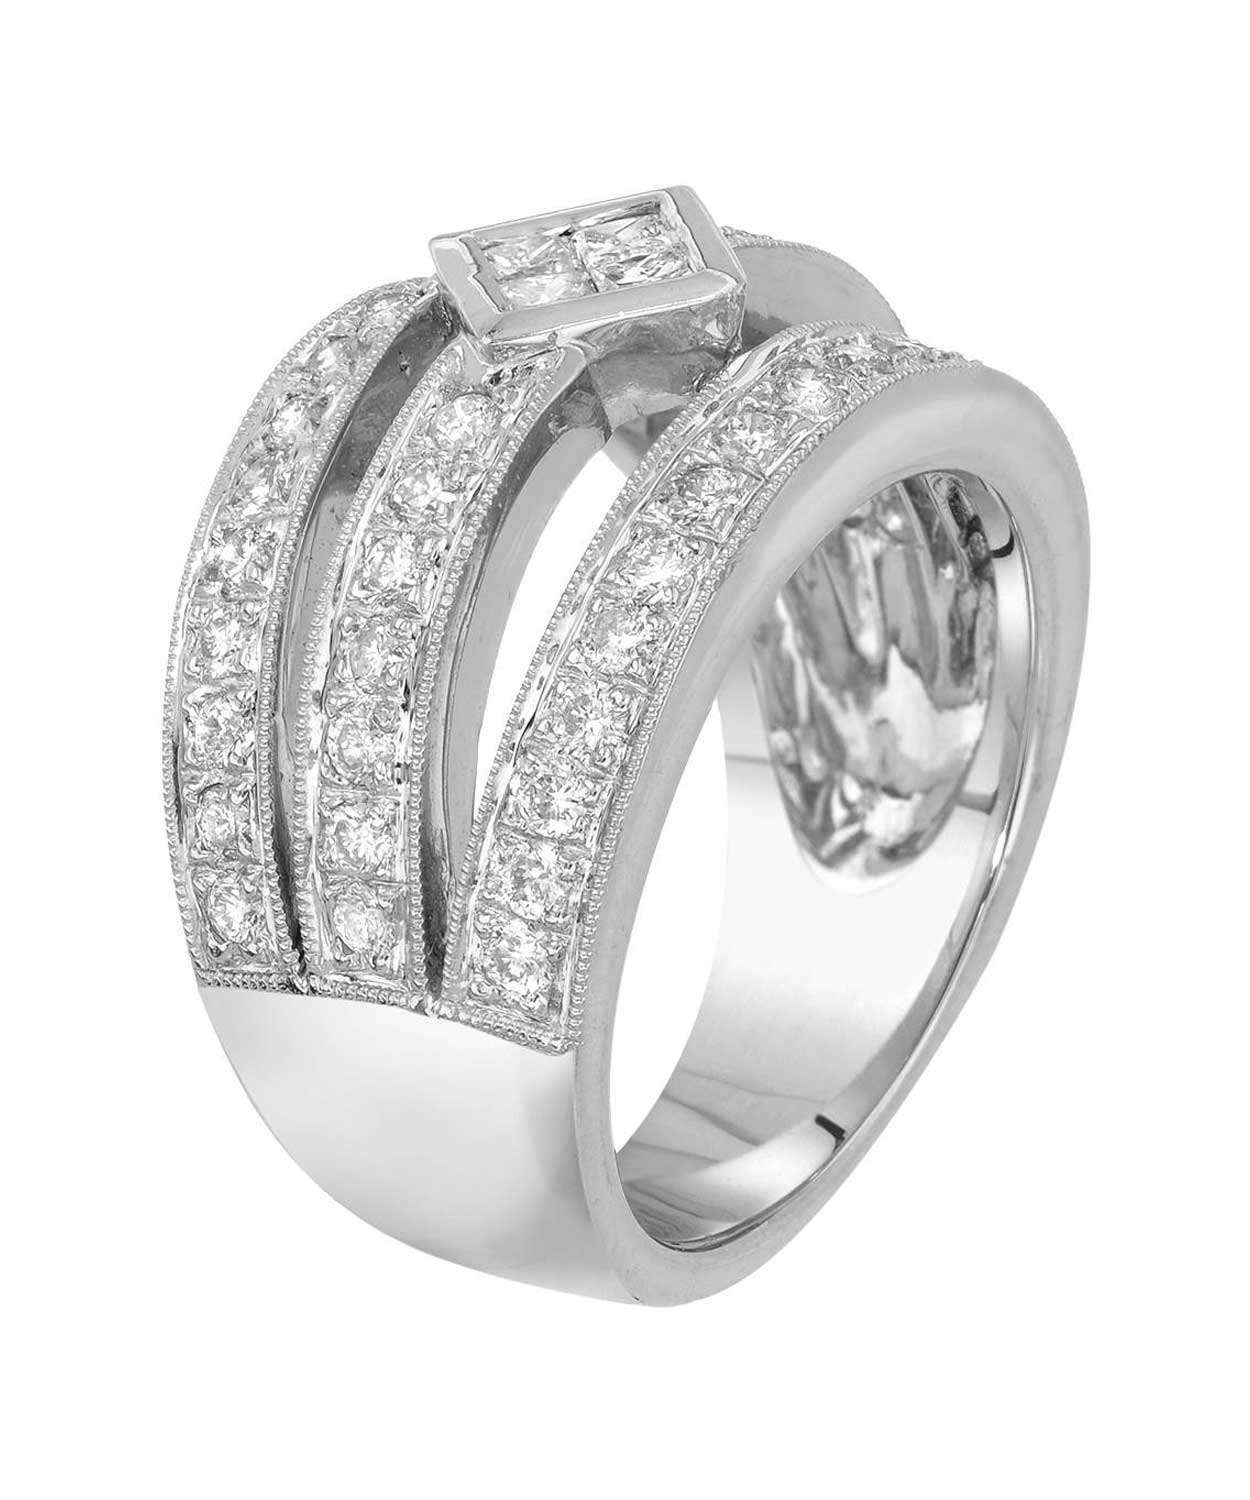 Signature Collection 1.20 ctw Diamond 18k White Gold Statement Ring View 2